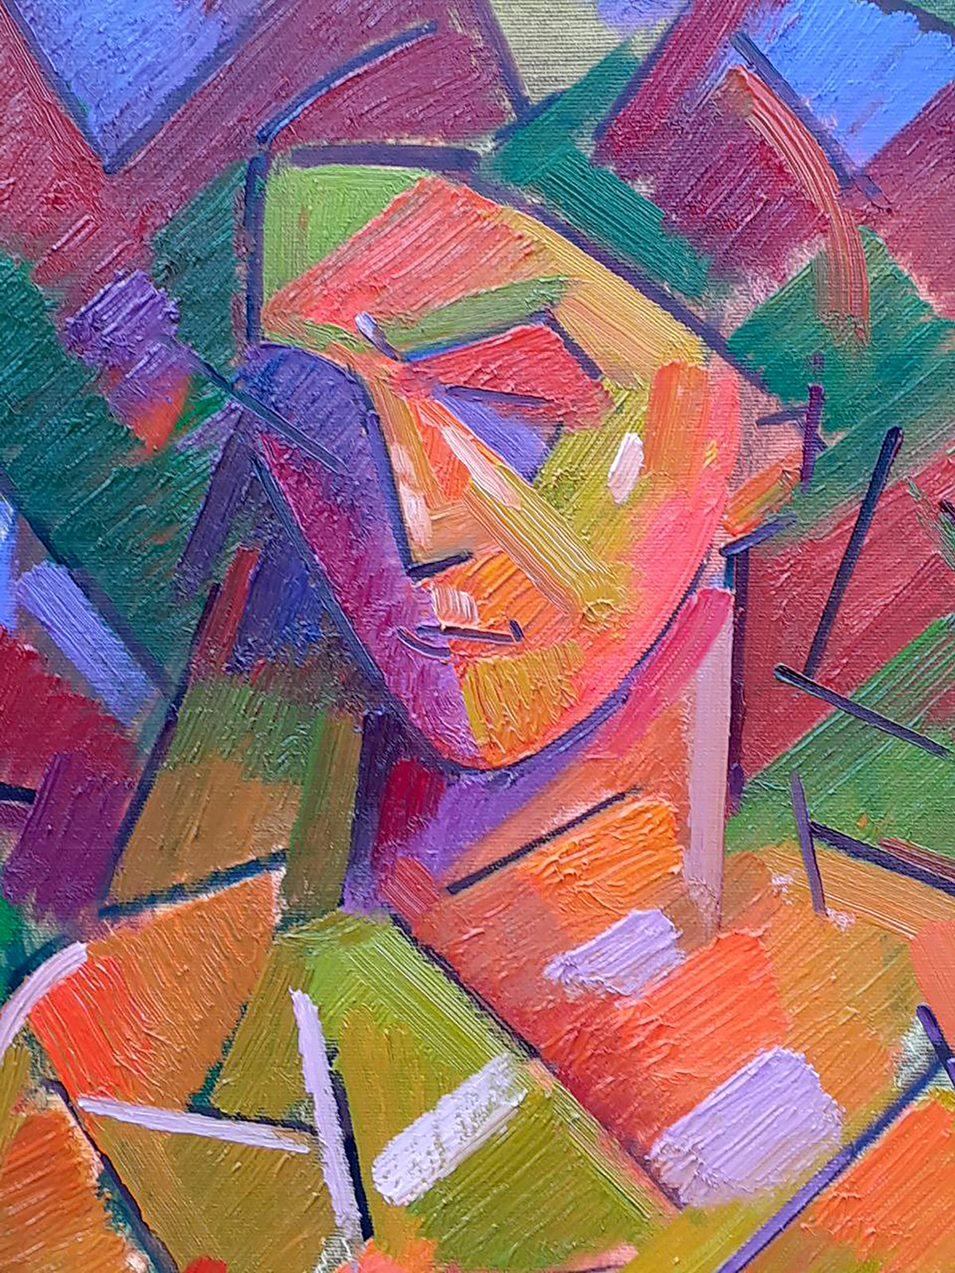 Artist: Peter Tovpev
Work: Original oil painting, handmade artwork, one of a kind 
Medium: Oil on Canvas 
Year: 2022
Style: Cubism
Title: Nude Woman
Size: 33.5